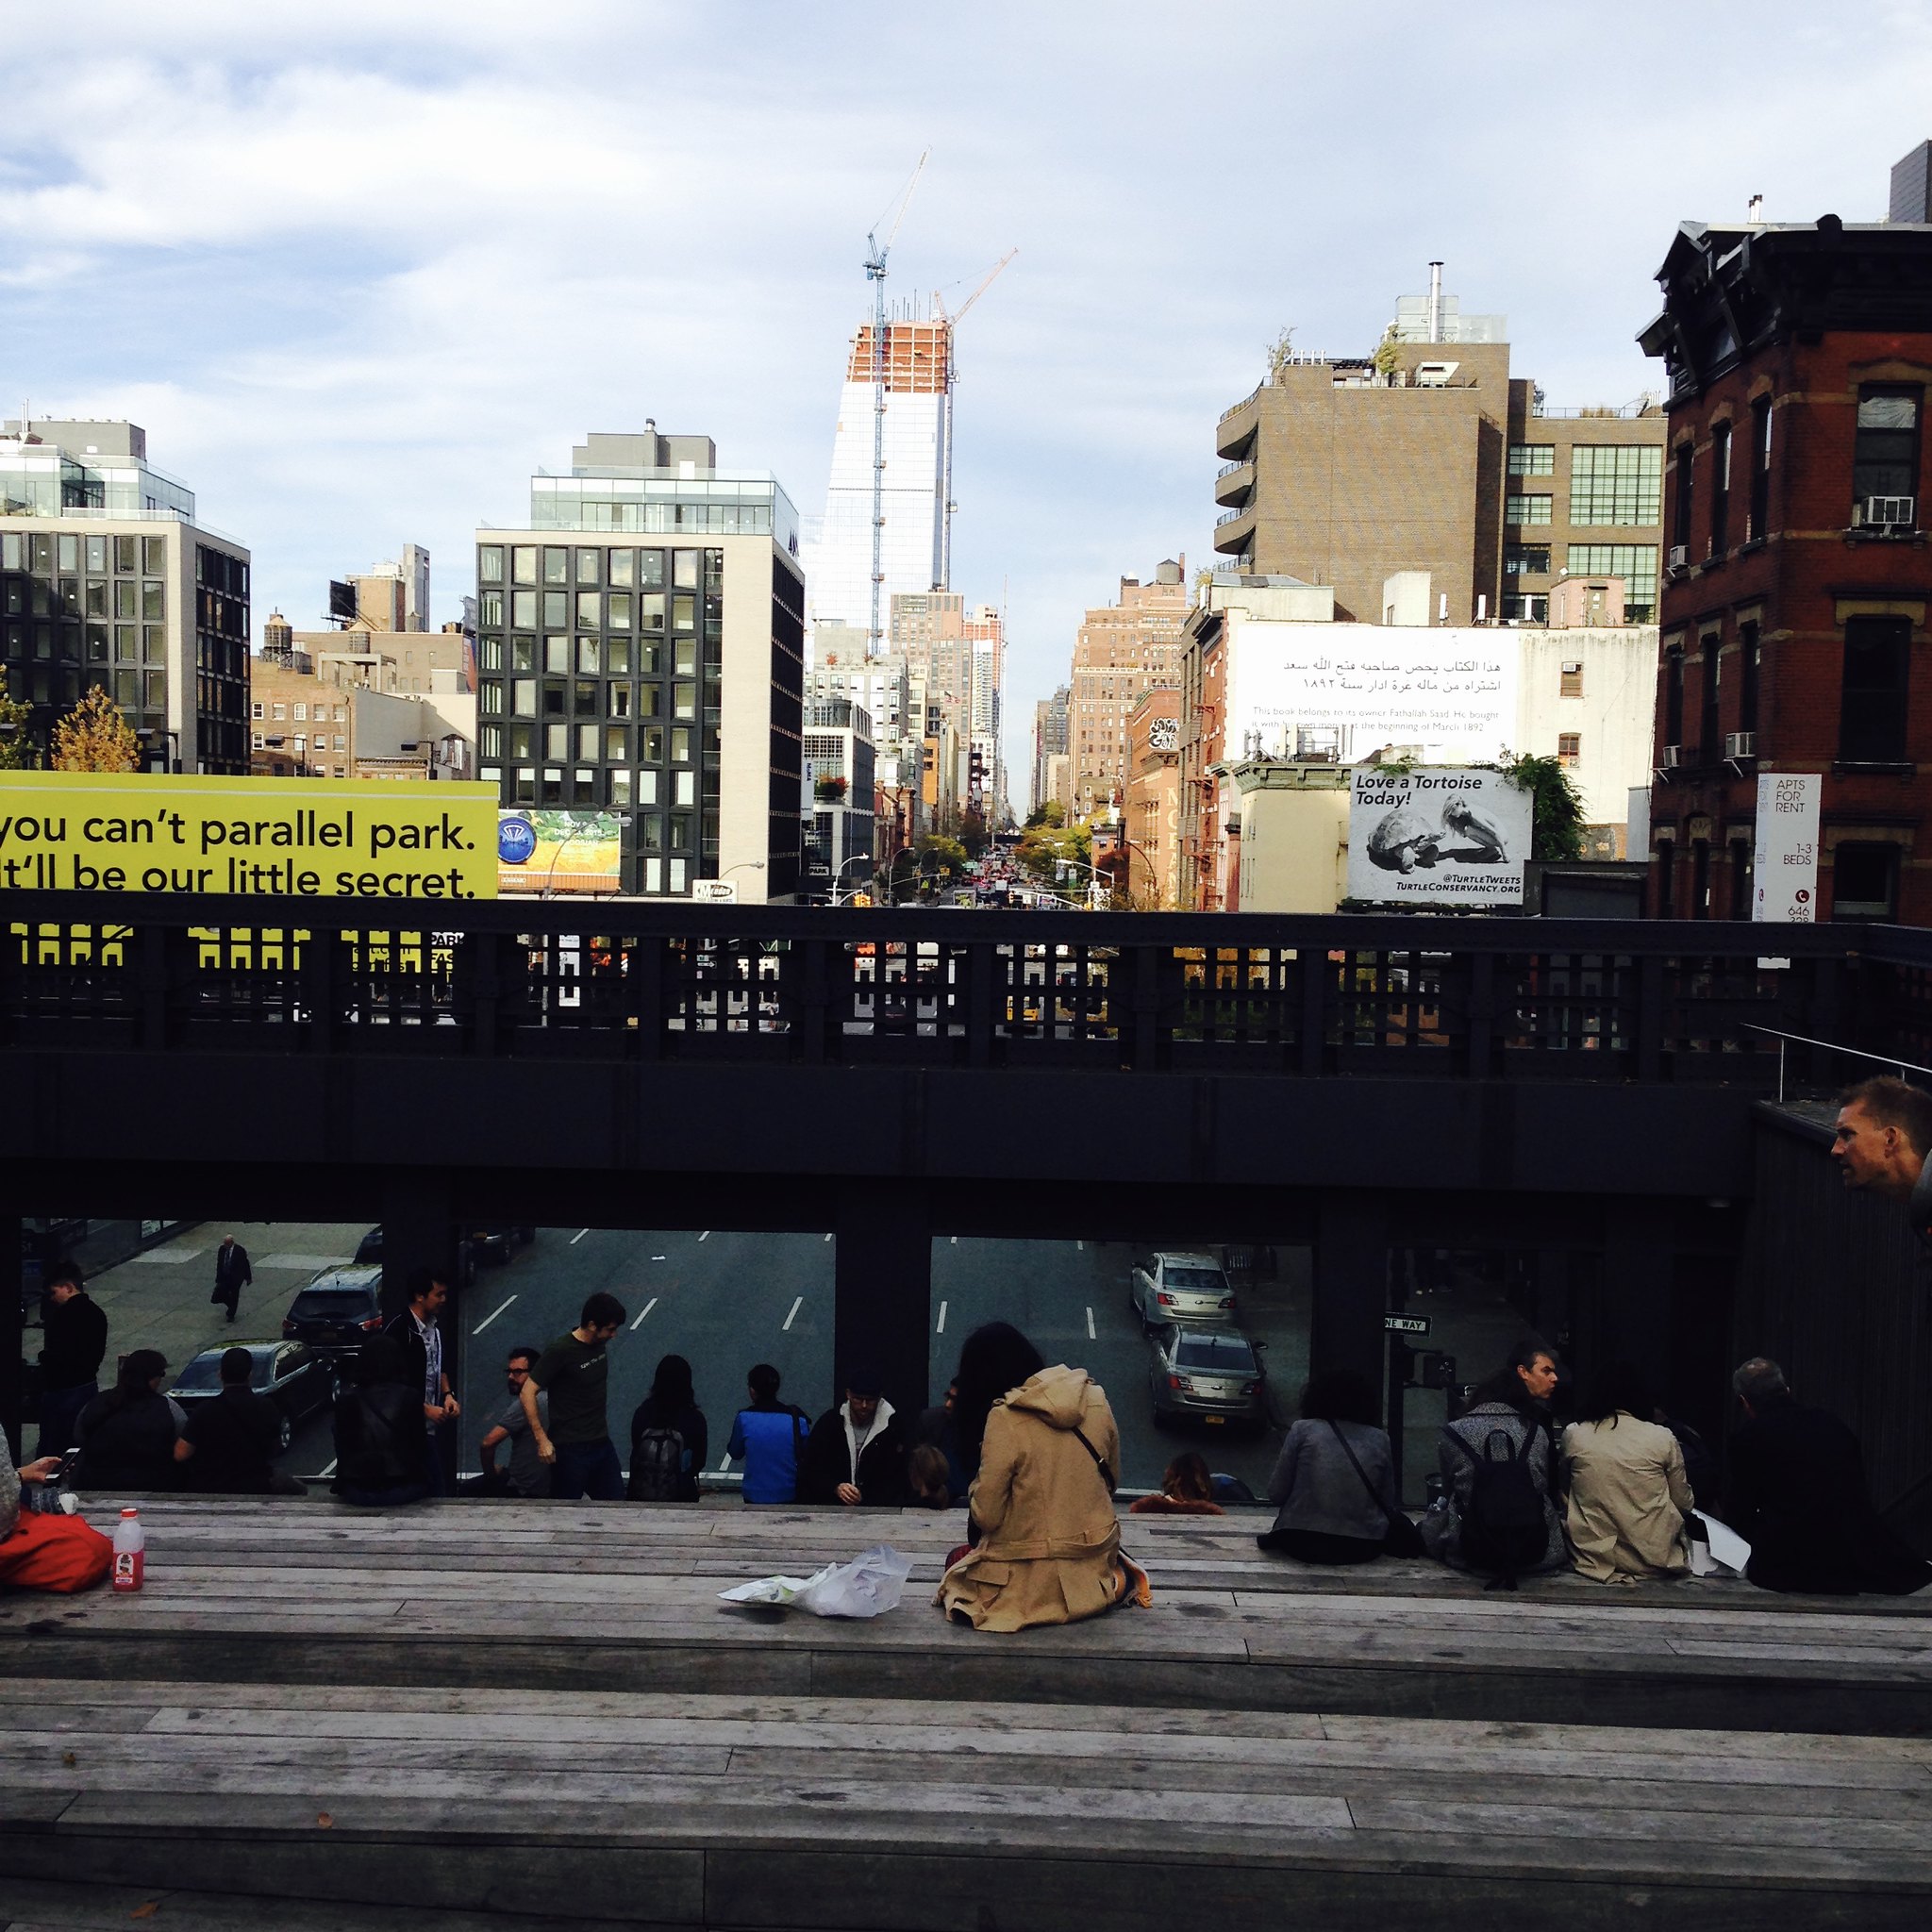 From the Highline